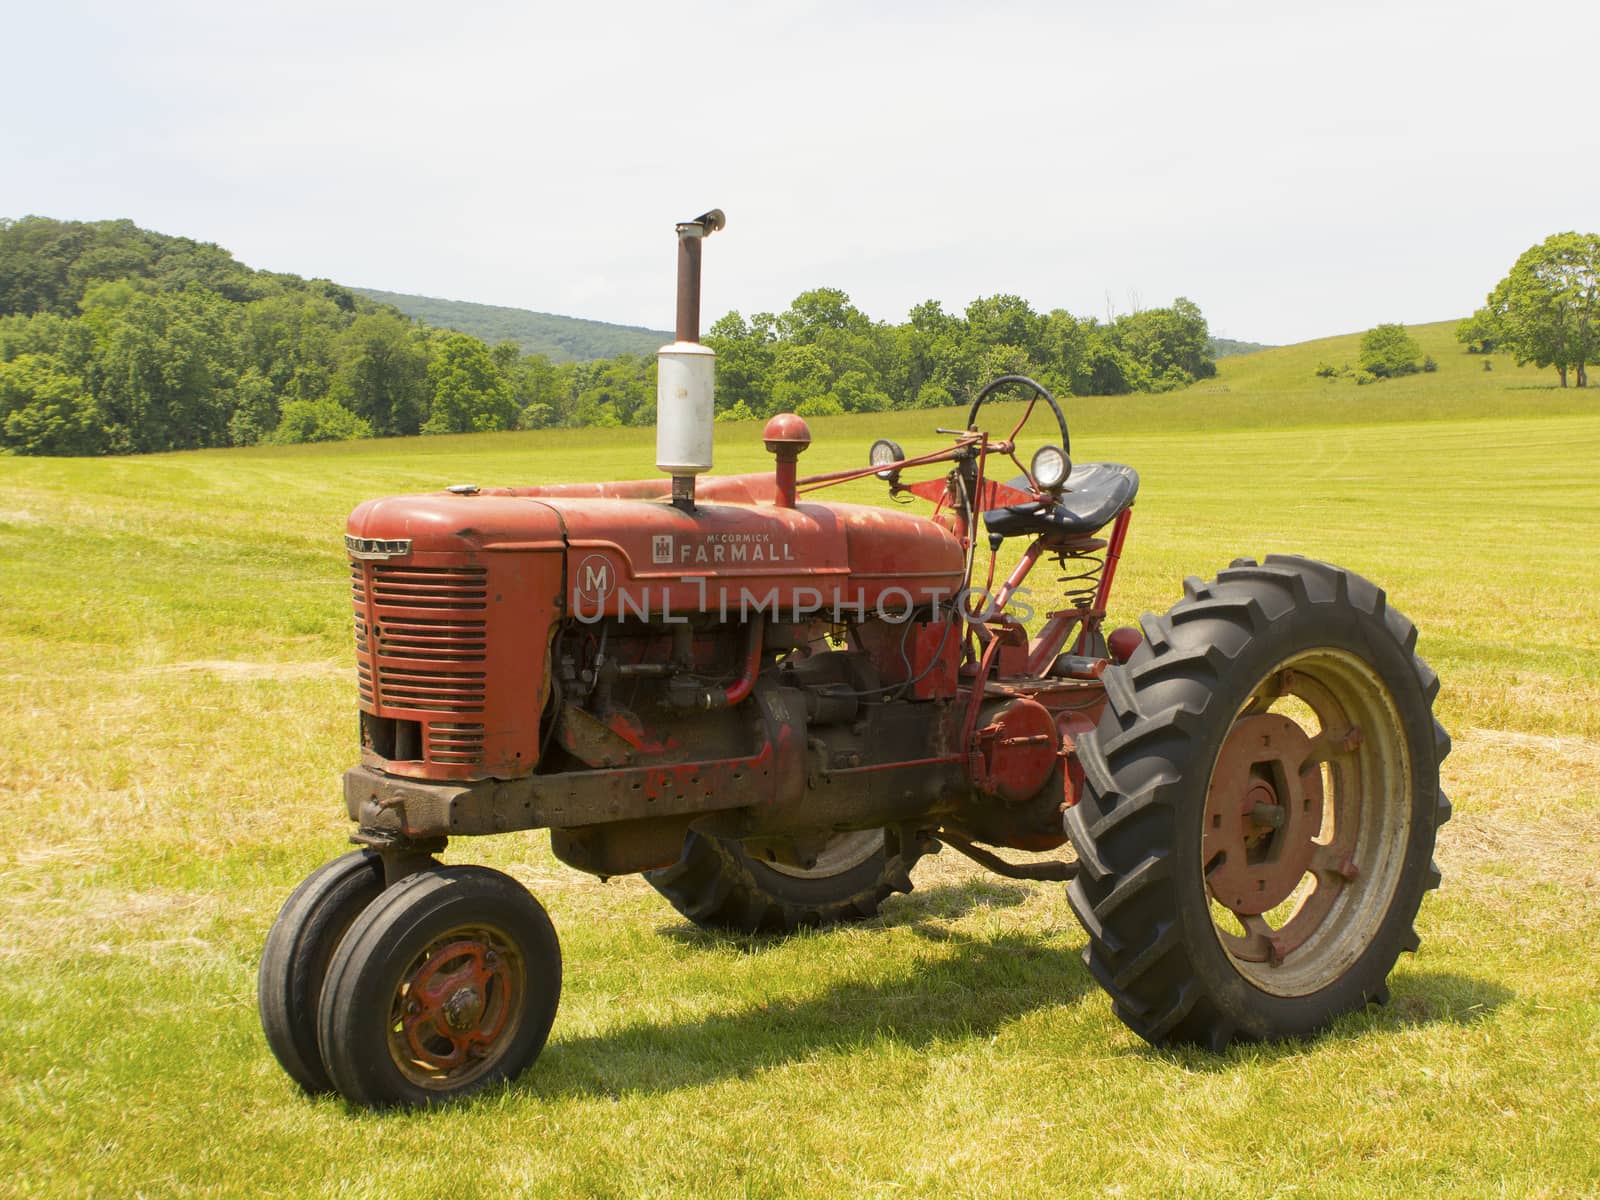 Old Farmall tractor sitting in a field by CharlieFloyd